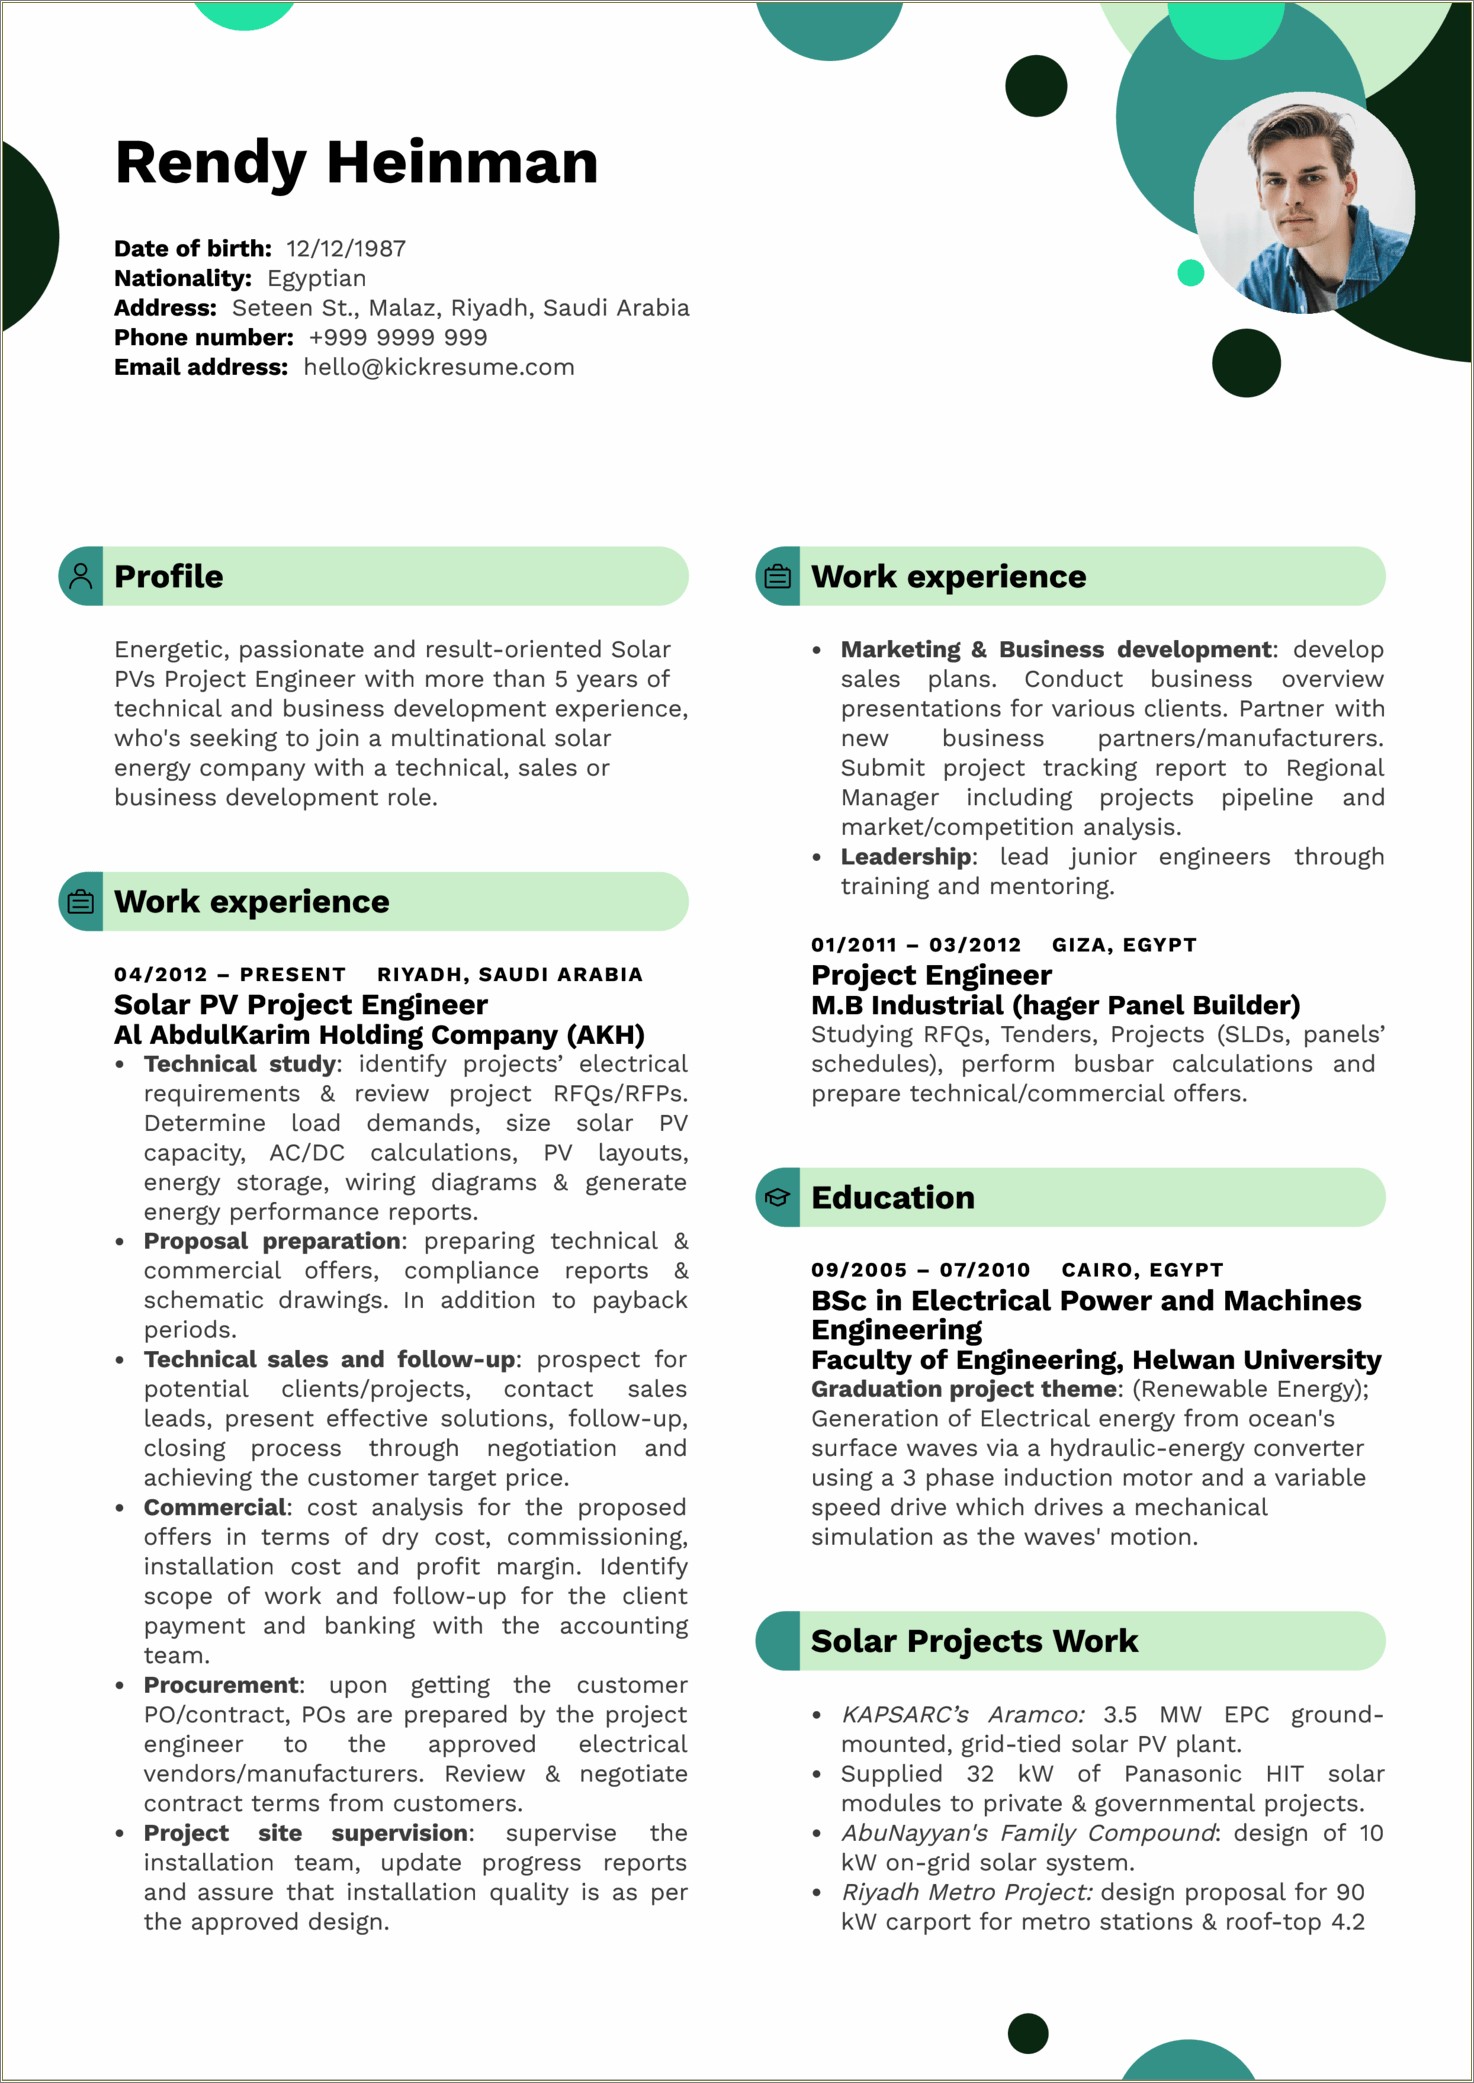 solar project manager resume sample